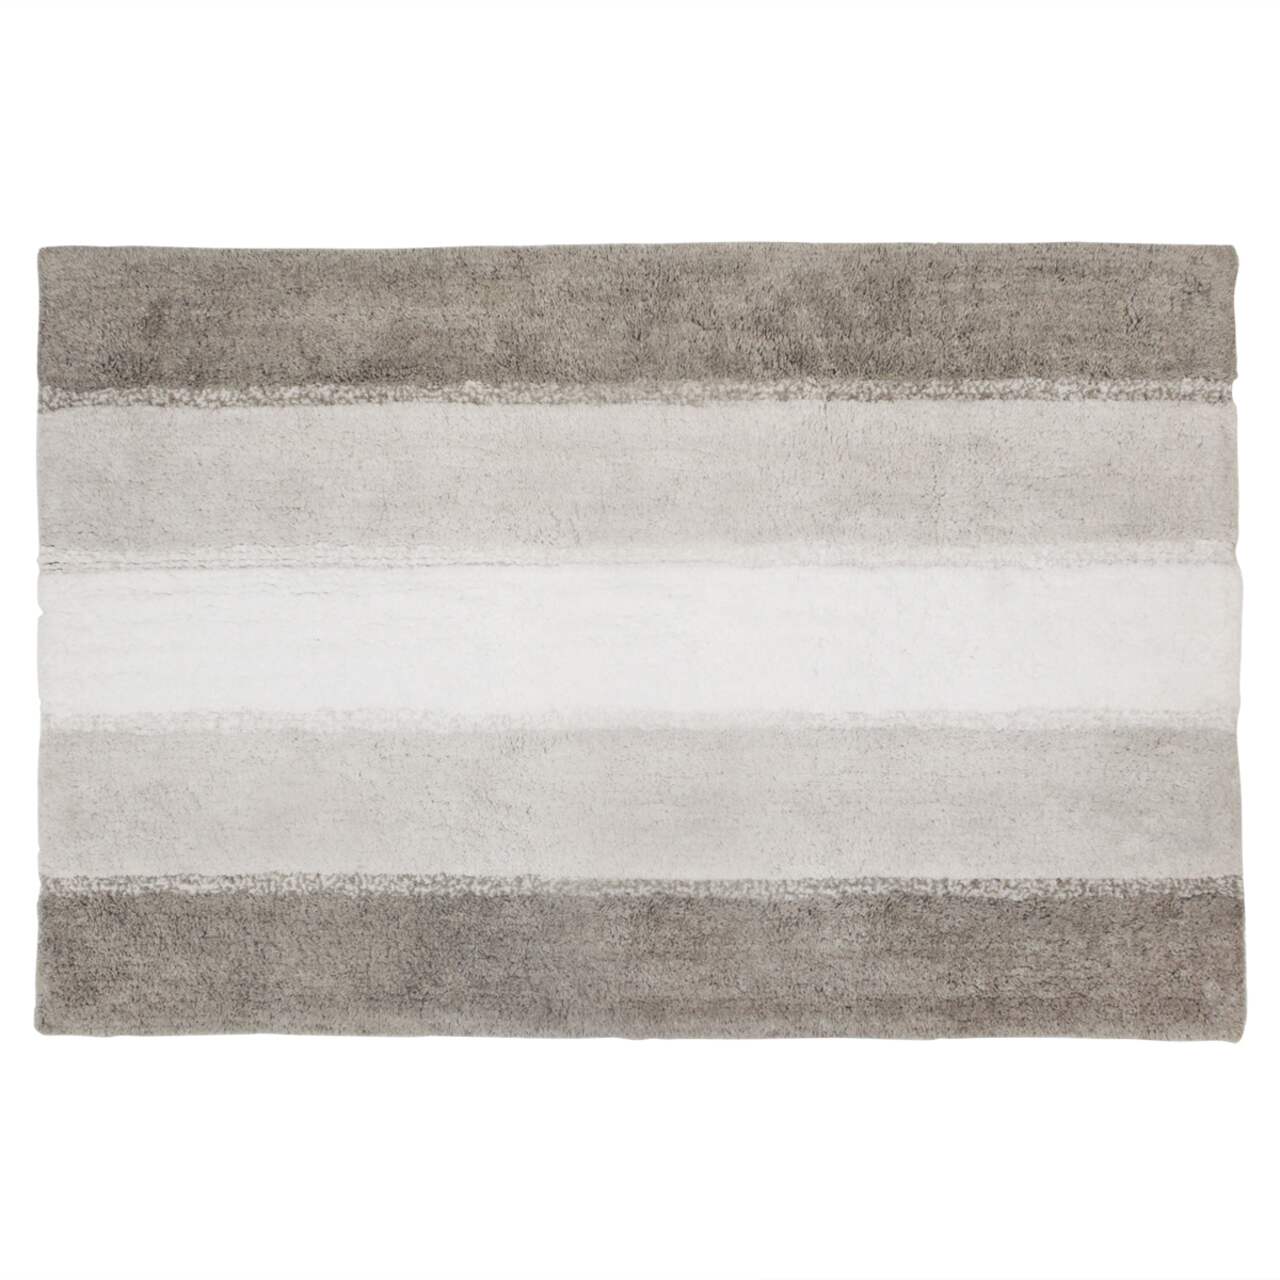 https://media-www.canadiantire.ca/product/living/home-decor/bed-bath-decor/0636261/canvas-cotton-stripe-bath-rug-beige--9ca07db0-ebd3-4a8c-b37c-b1e7f6de6d8c.png?imdensity=1&imwidth=1244&impolicy=mZoom